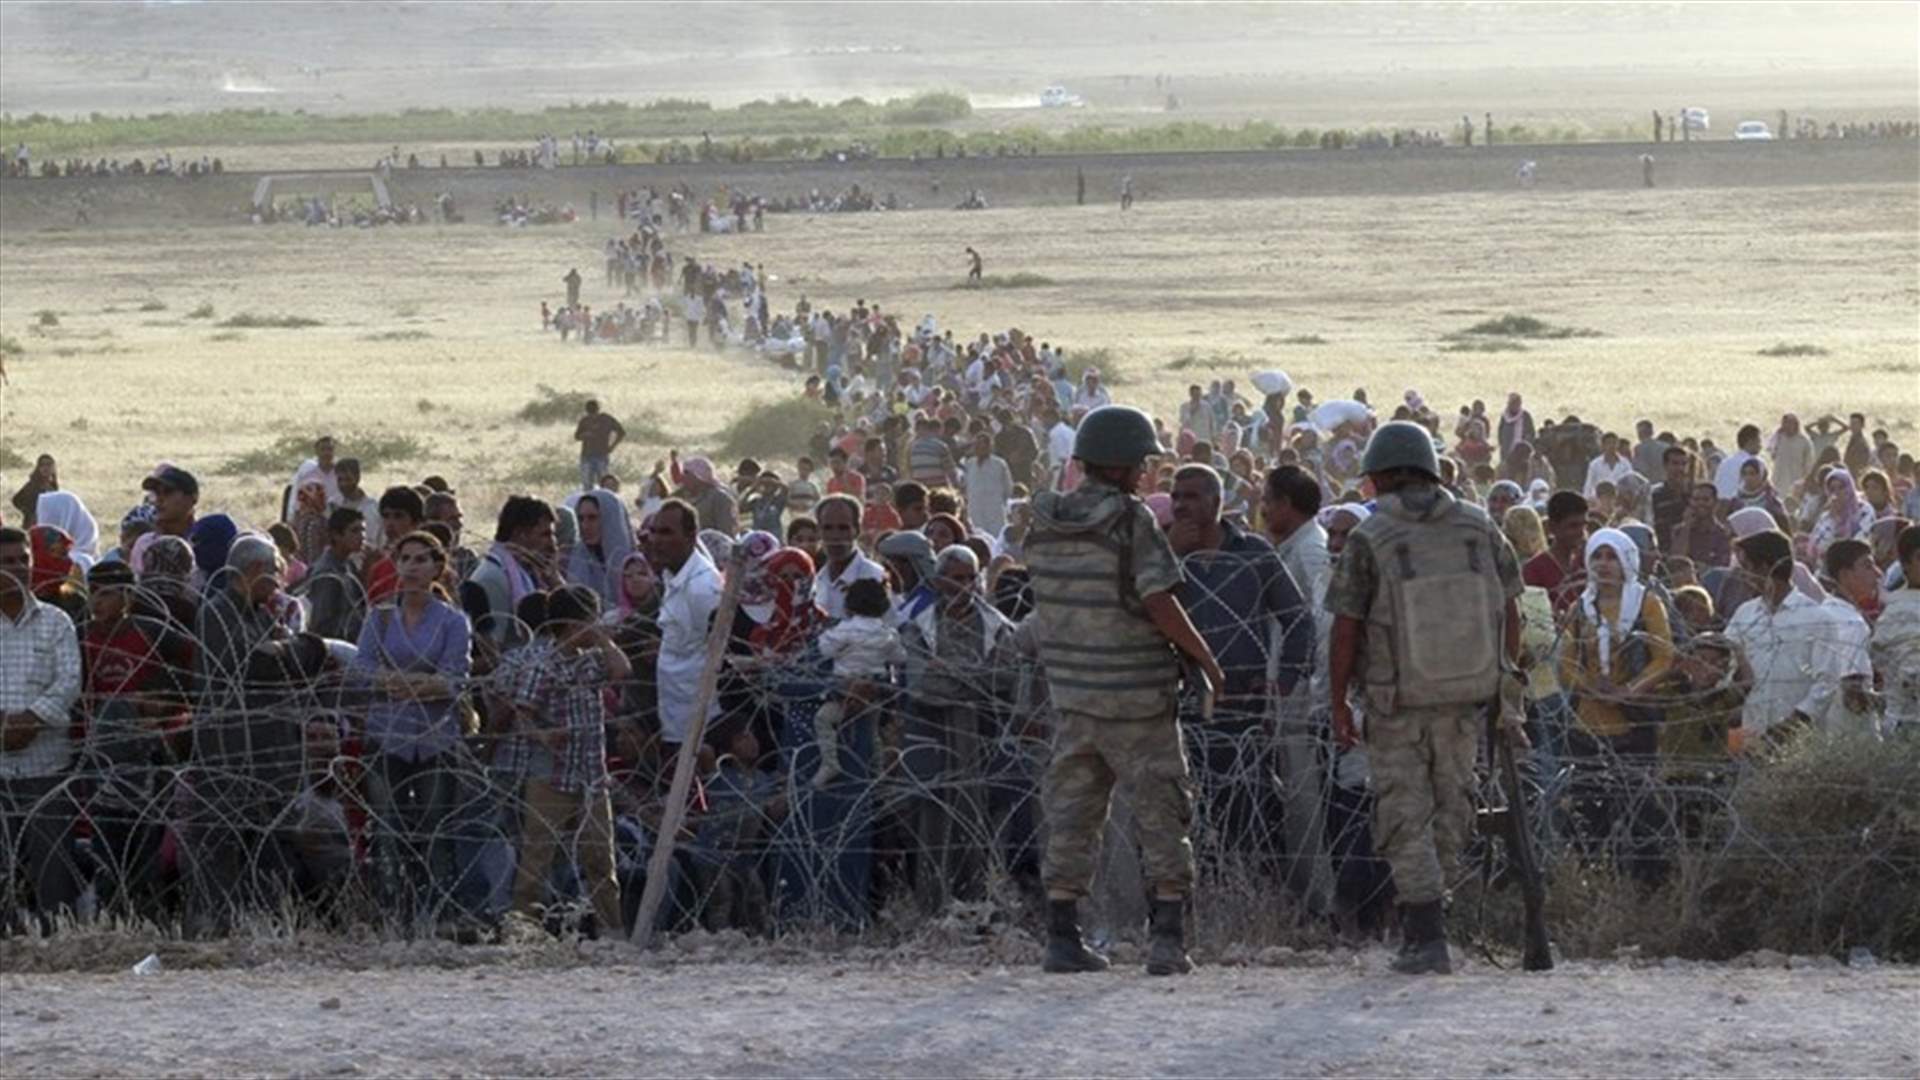 Turkey will take refugees fleeing Syrian forces &#39;when necessary&#39; - PM